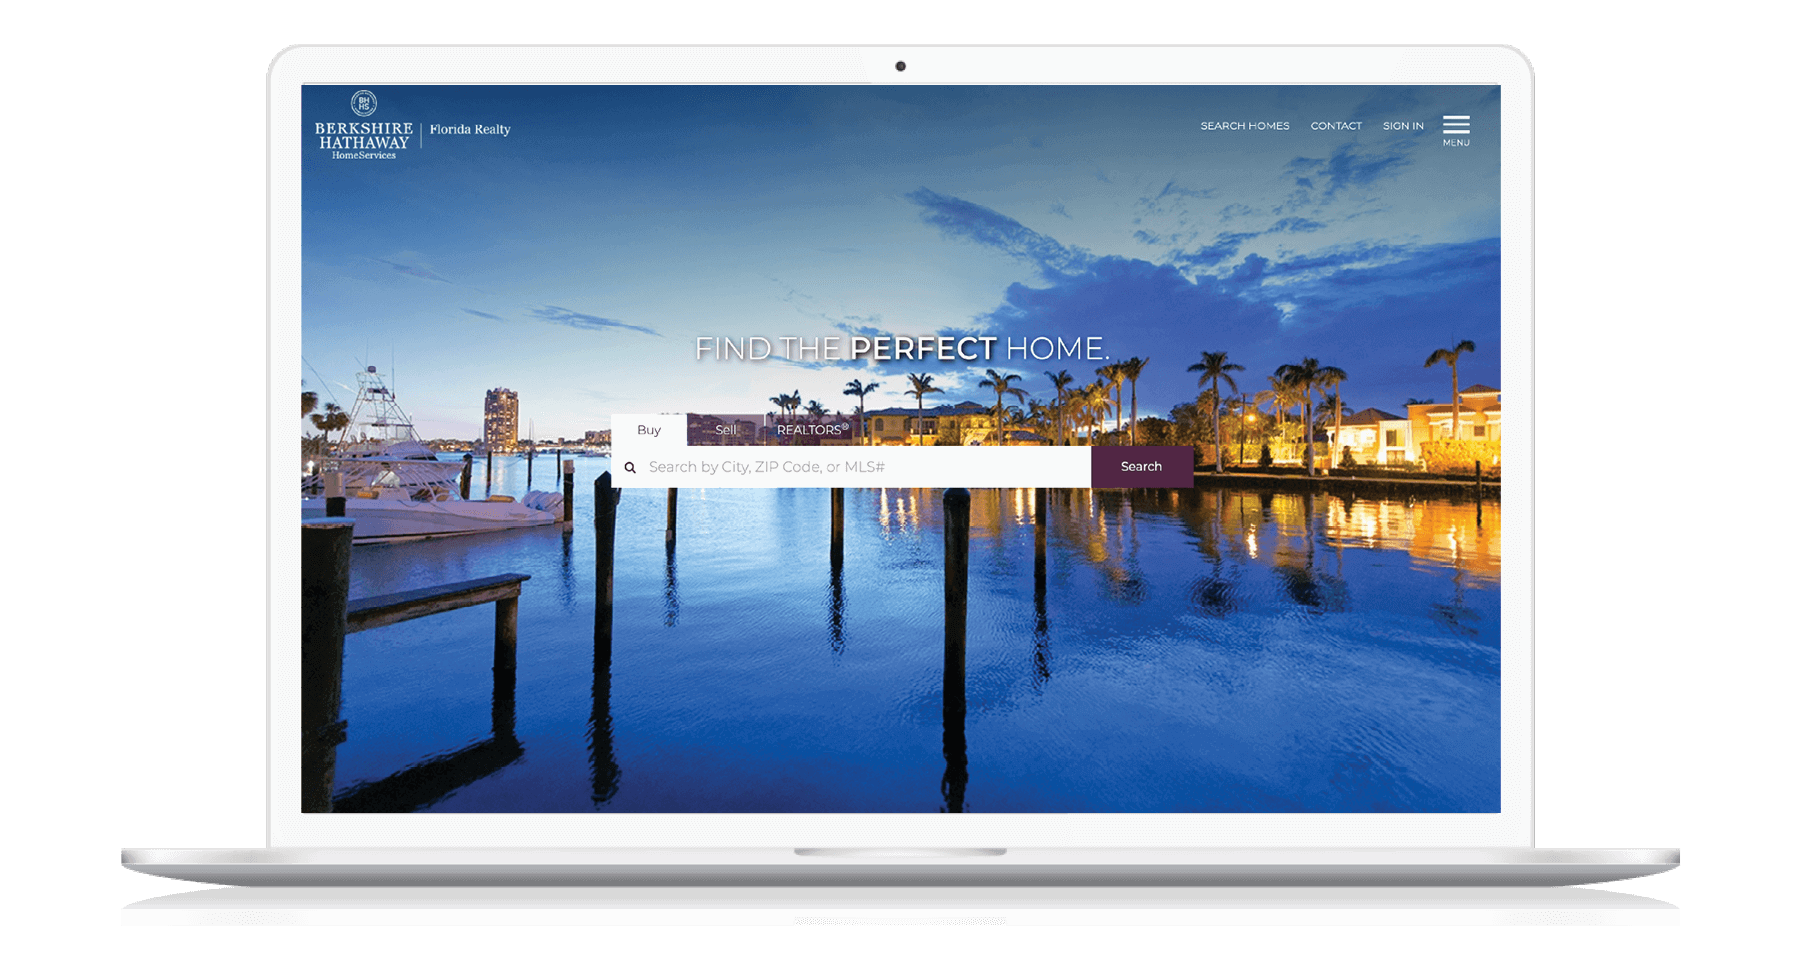 A laptop displaying the BHHS Florida Realty homepage, showing waterfront properties for sale in Florida at dusk.